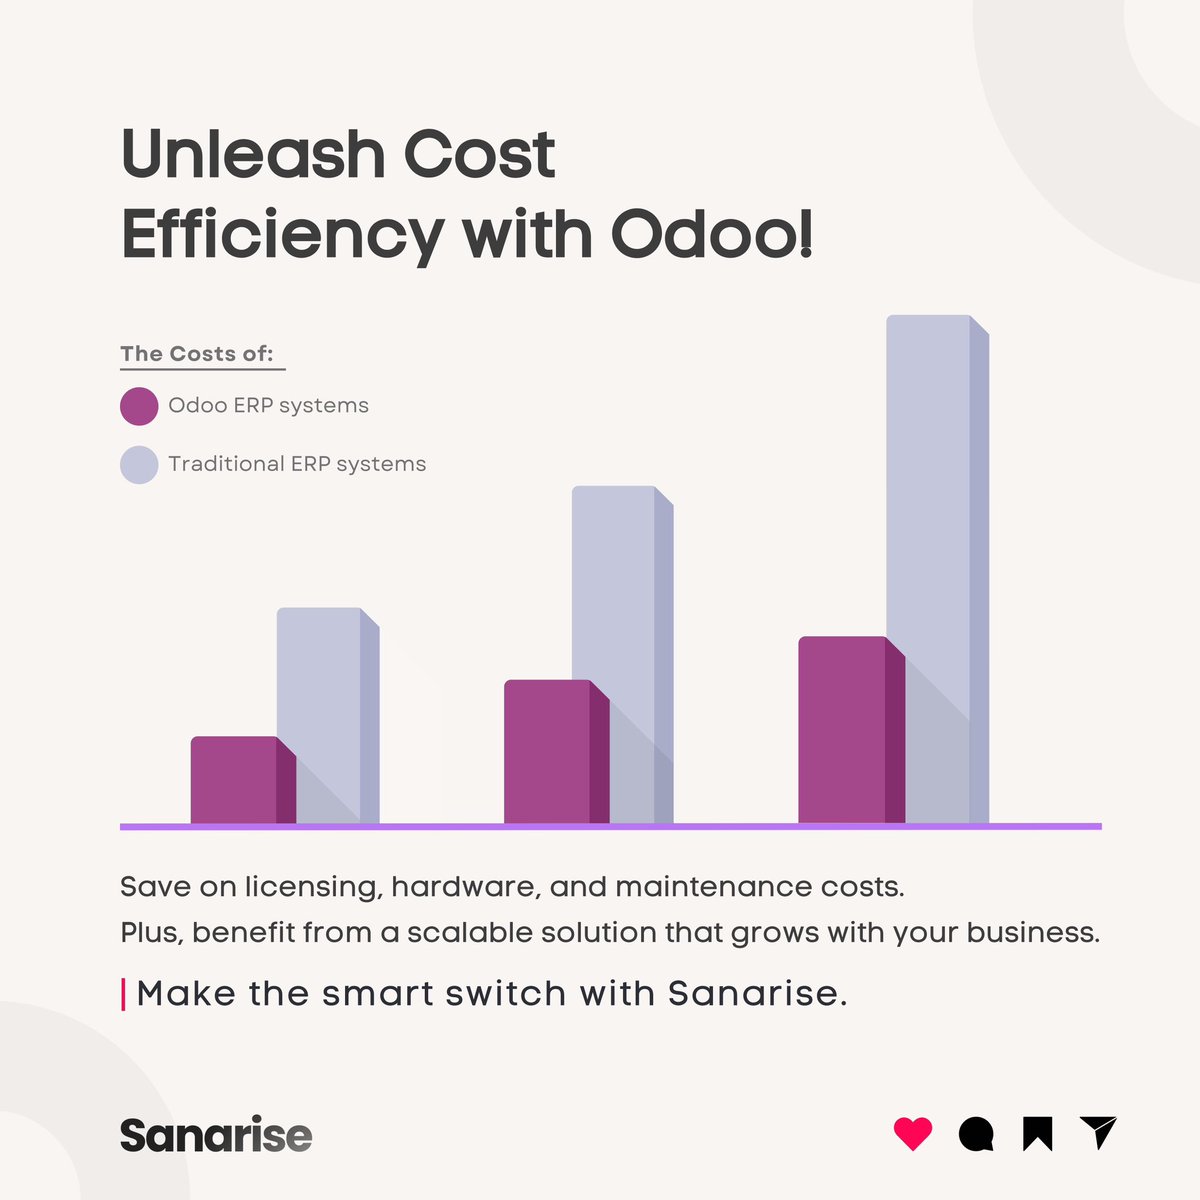 Maximize Your ROI with Odoo! Discover how switching to Odoo can help your business save significantly compared to traditional ERP systems. 

#Odoo #ERP #CostEffective #Sanarise #MaximizeROI #BusinessSavings #OdooERP #AffordableERP